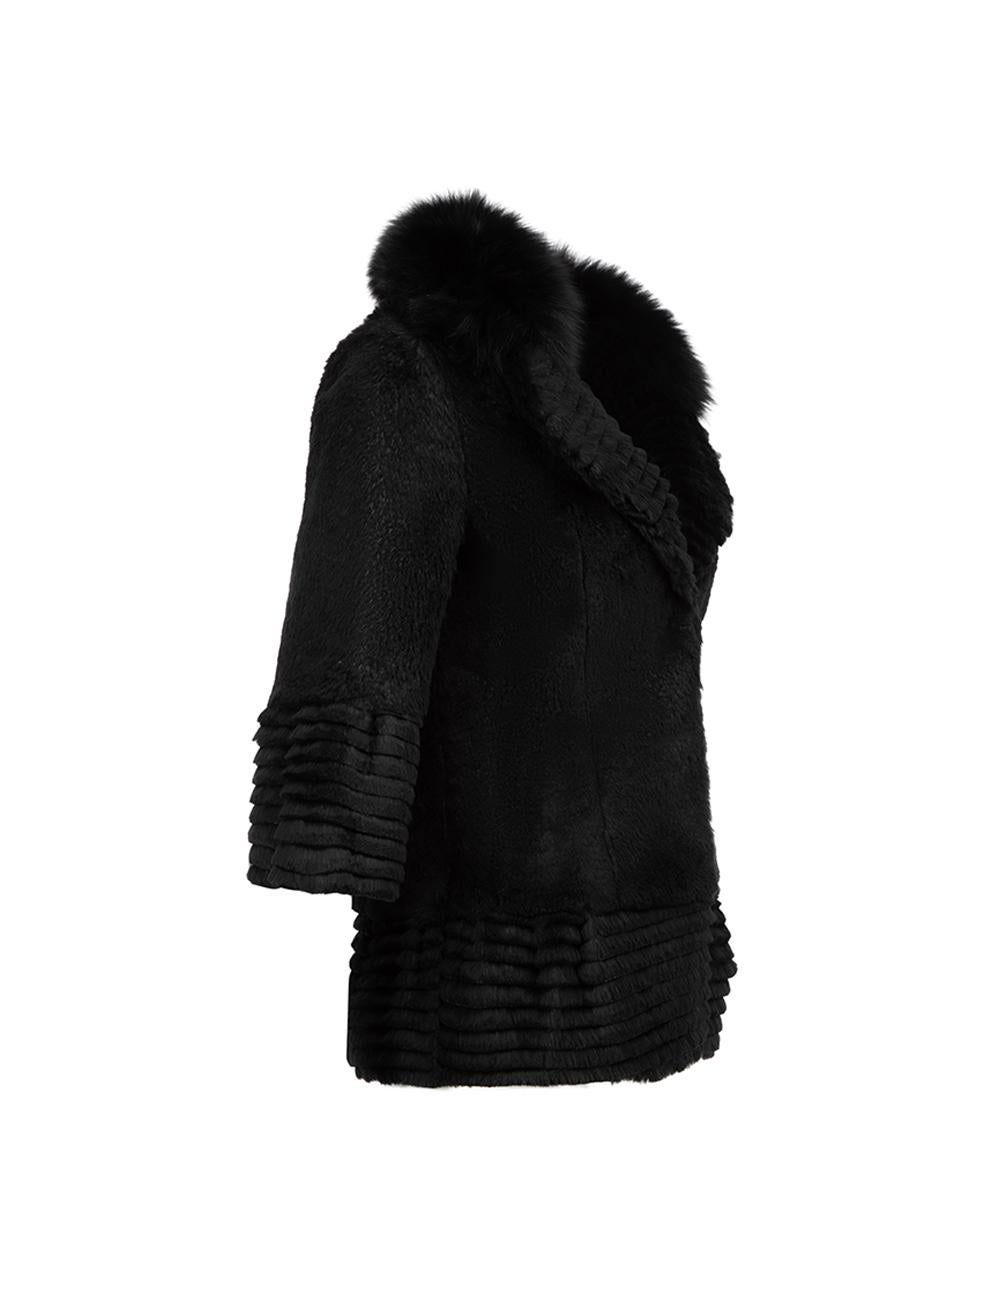 CONDITION is Very good. Hardly any visible wear to coat is evident on this used Tu Huang designer resale item. Details Black Rabbit fur Mid length coat Front clasp and eye closure Layered stripy trim detail Fully lined with leopard print silk Made